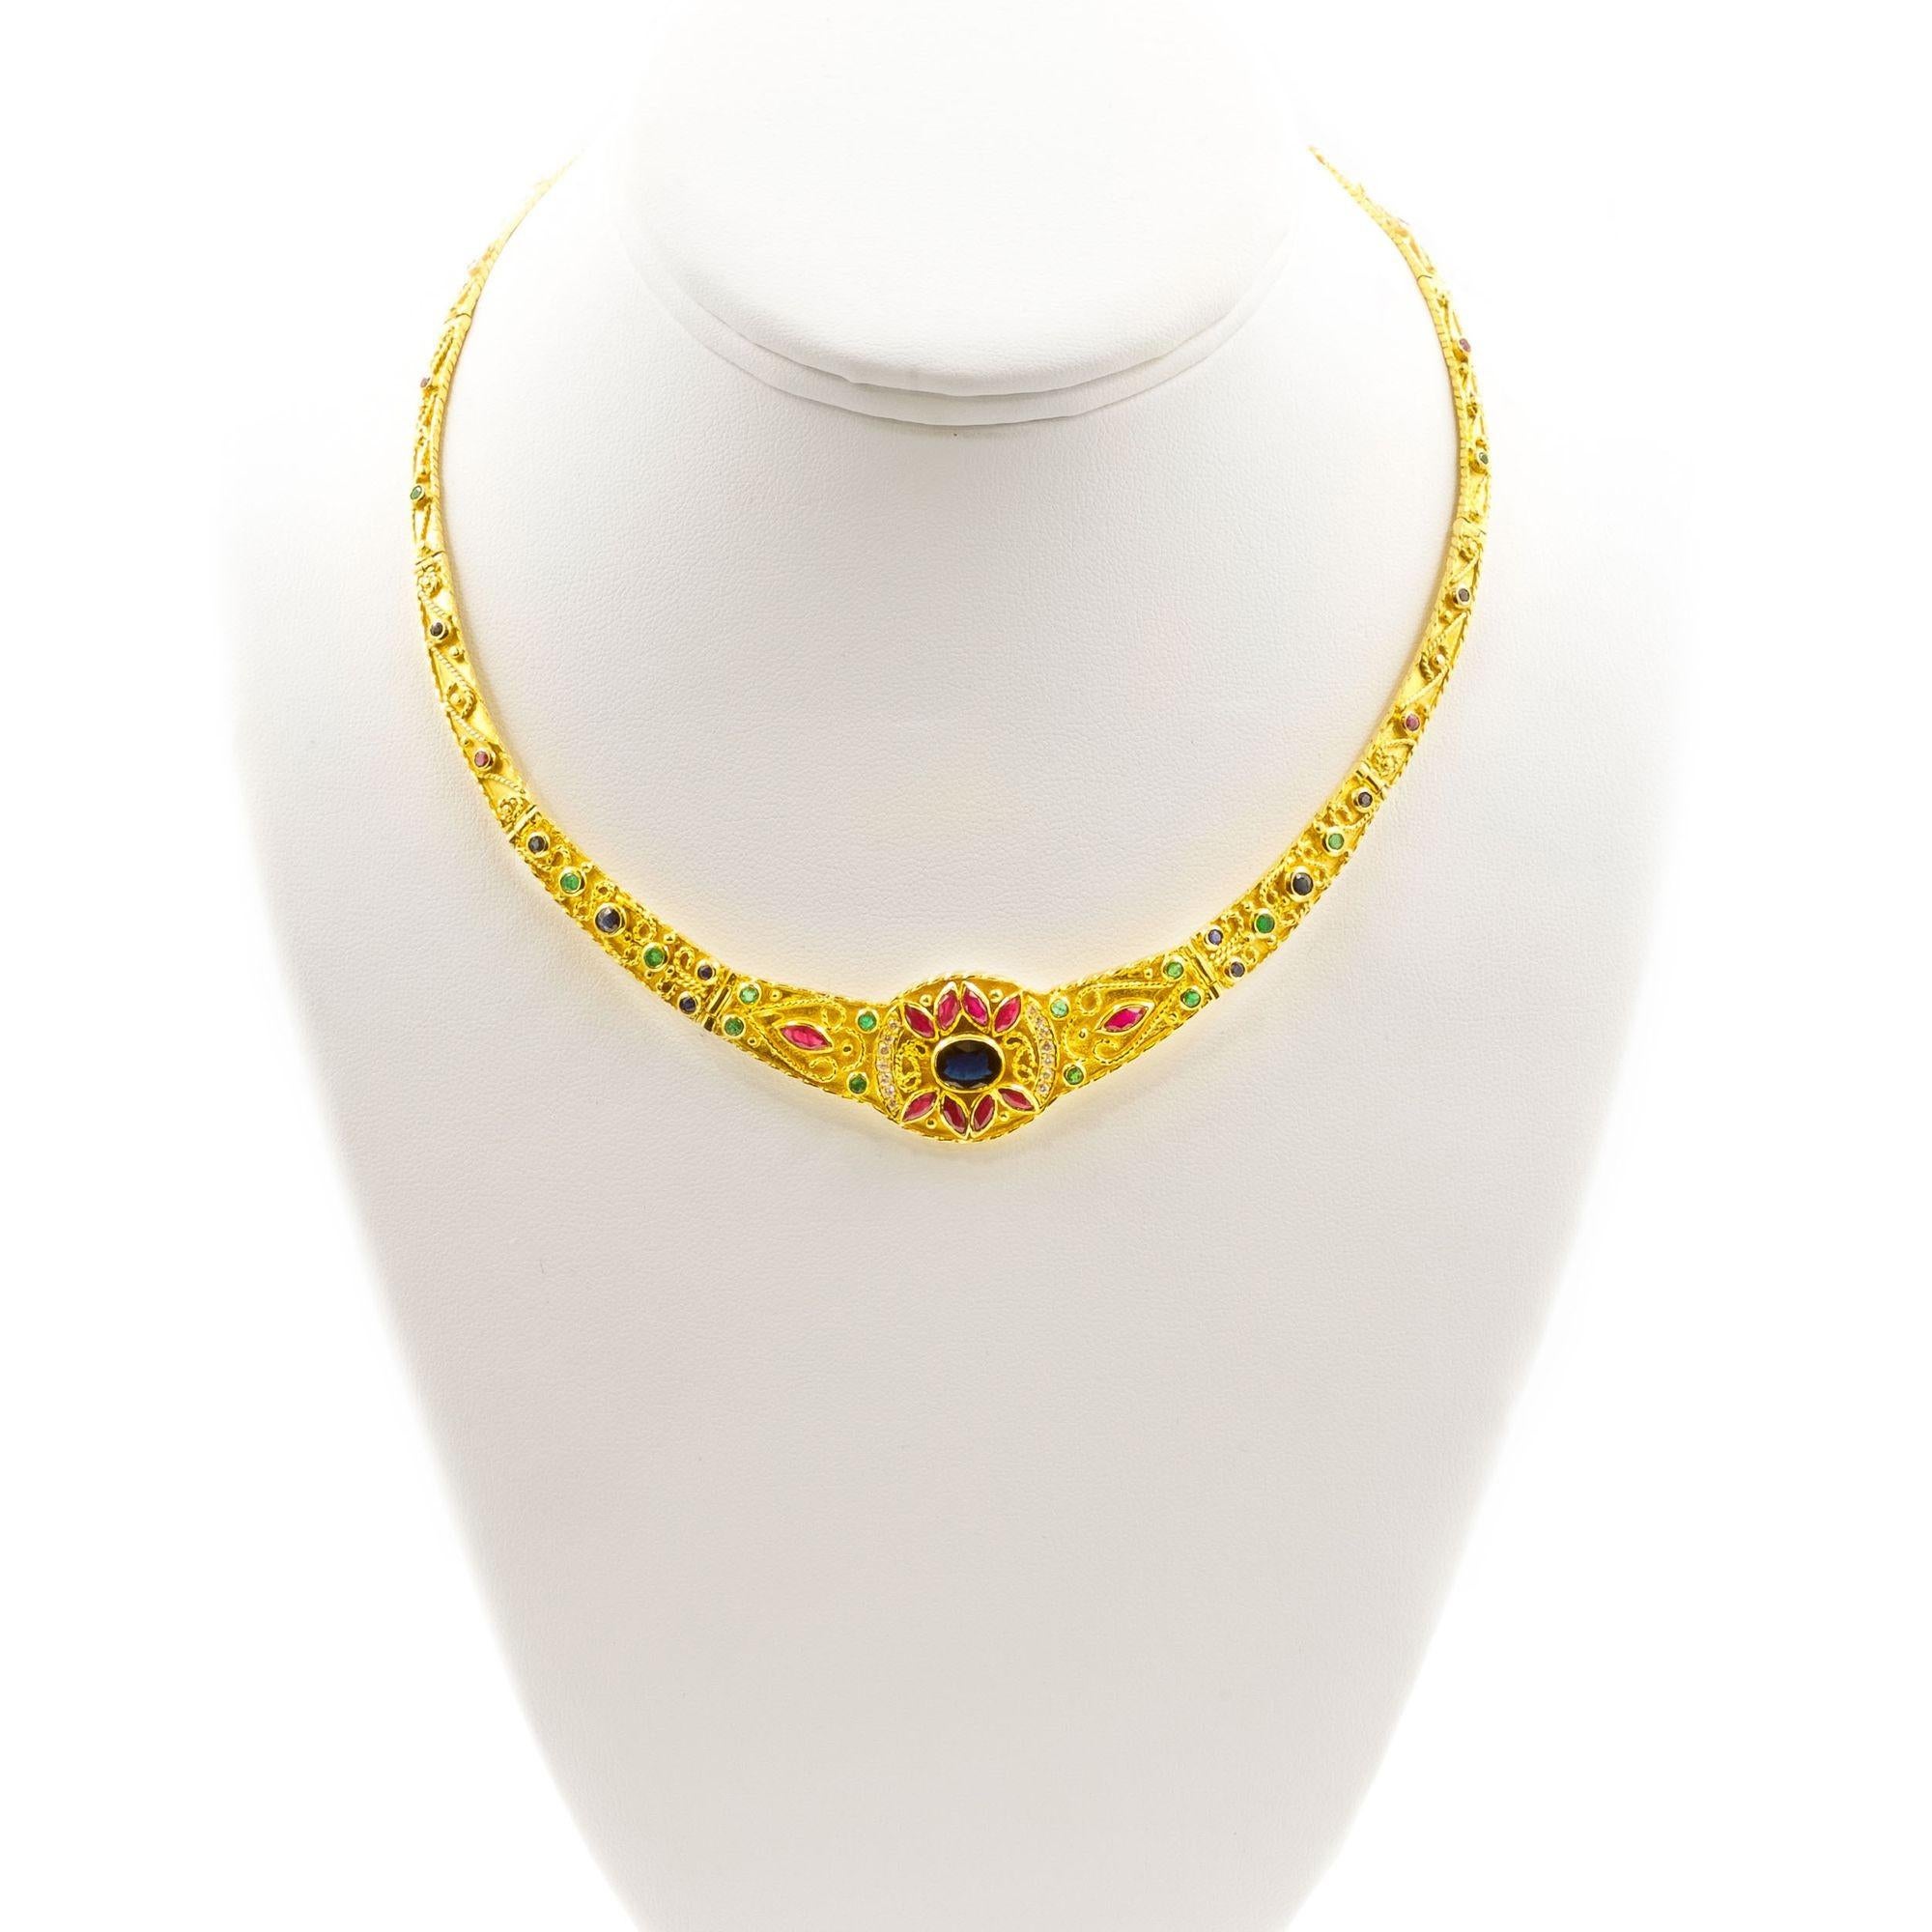 An absute eye-catcher, this intricately cast and beautifly detailed necklace is crafted of sid 18 karat yellow gd with a brilliant array of gemstones set within each individually cast and hinged link. These cminate in the stunning central focal